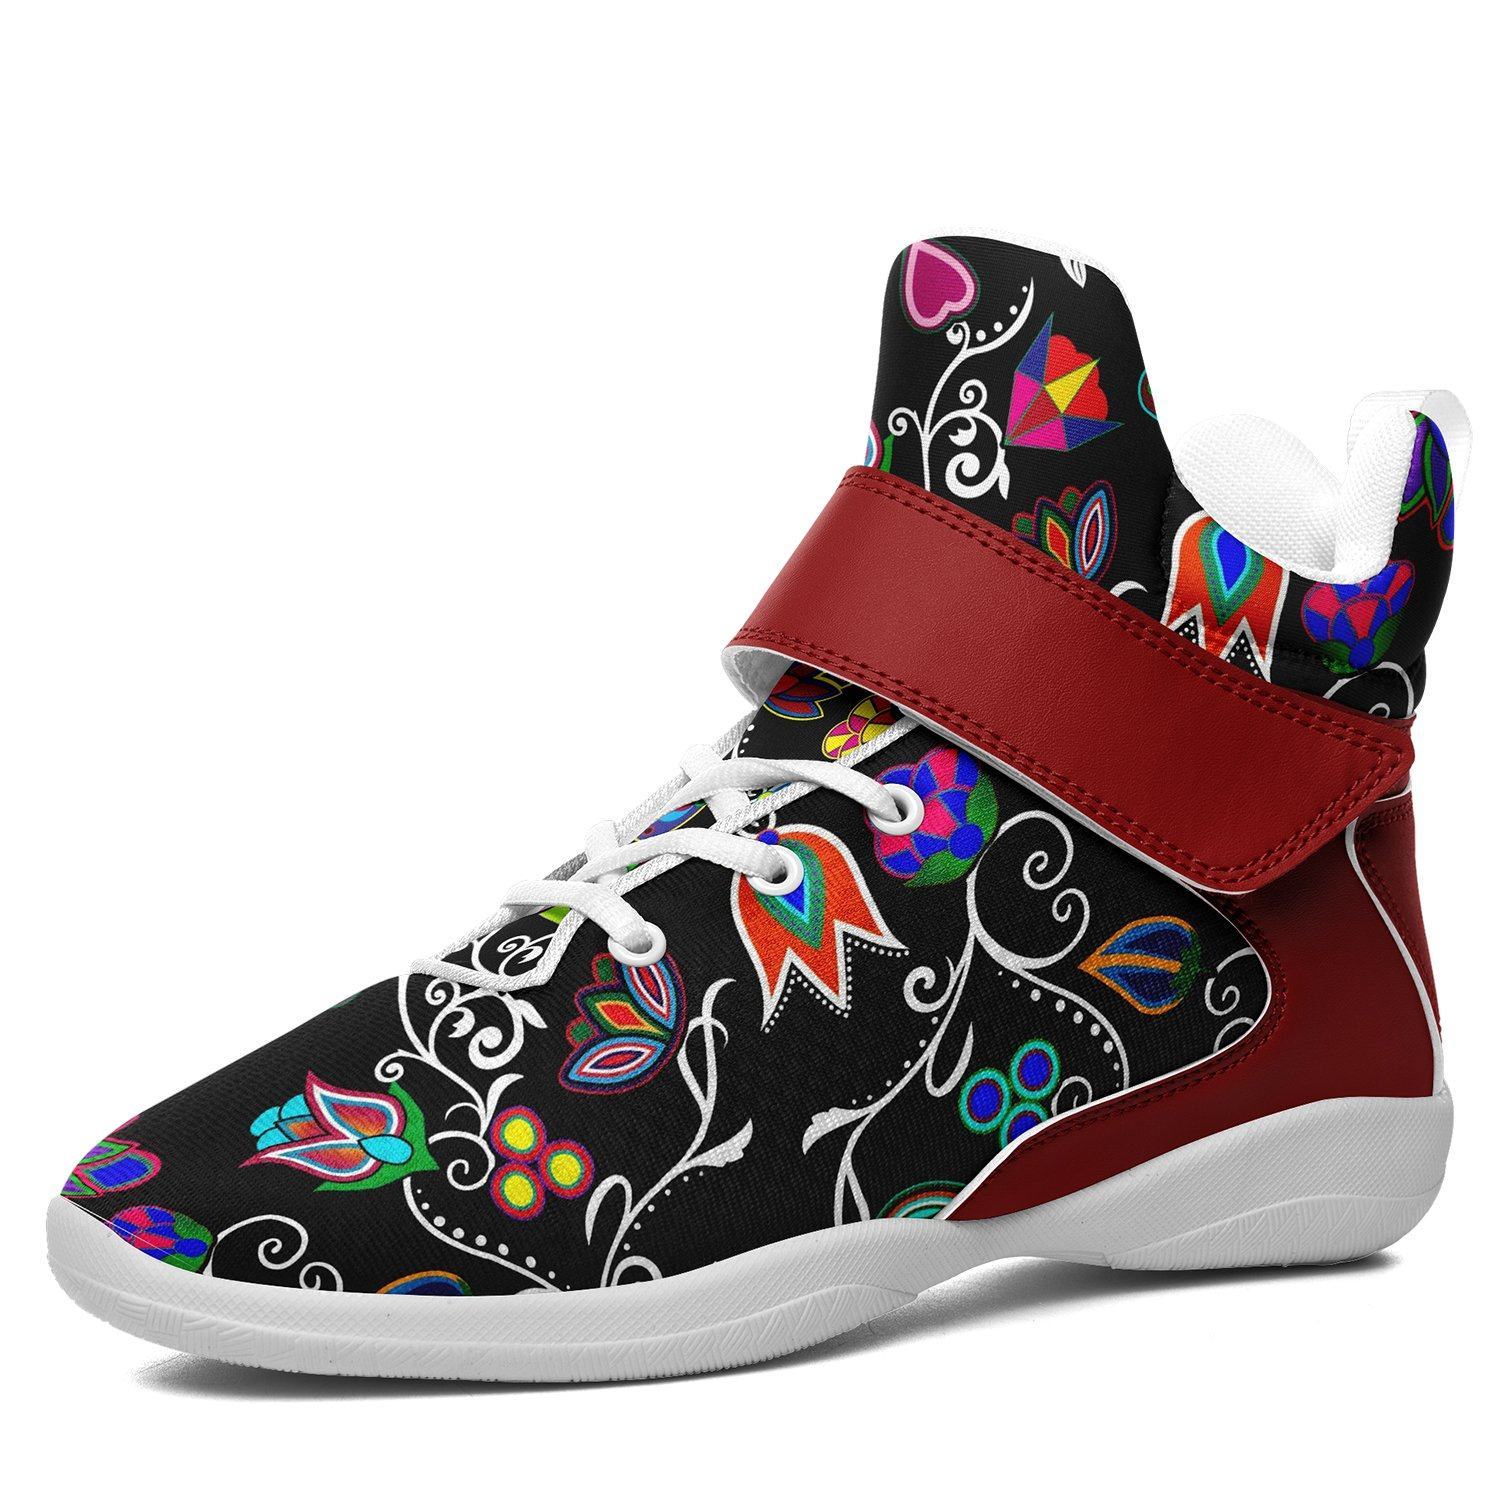 Indigenous Paisley Black Kid's Ipottaa Basketball / Sport High Top Shoes 49 Dzine US Child 12.5 / EUR 30 White Sole with Dark Red Strap 